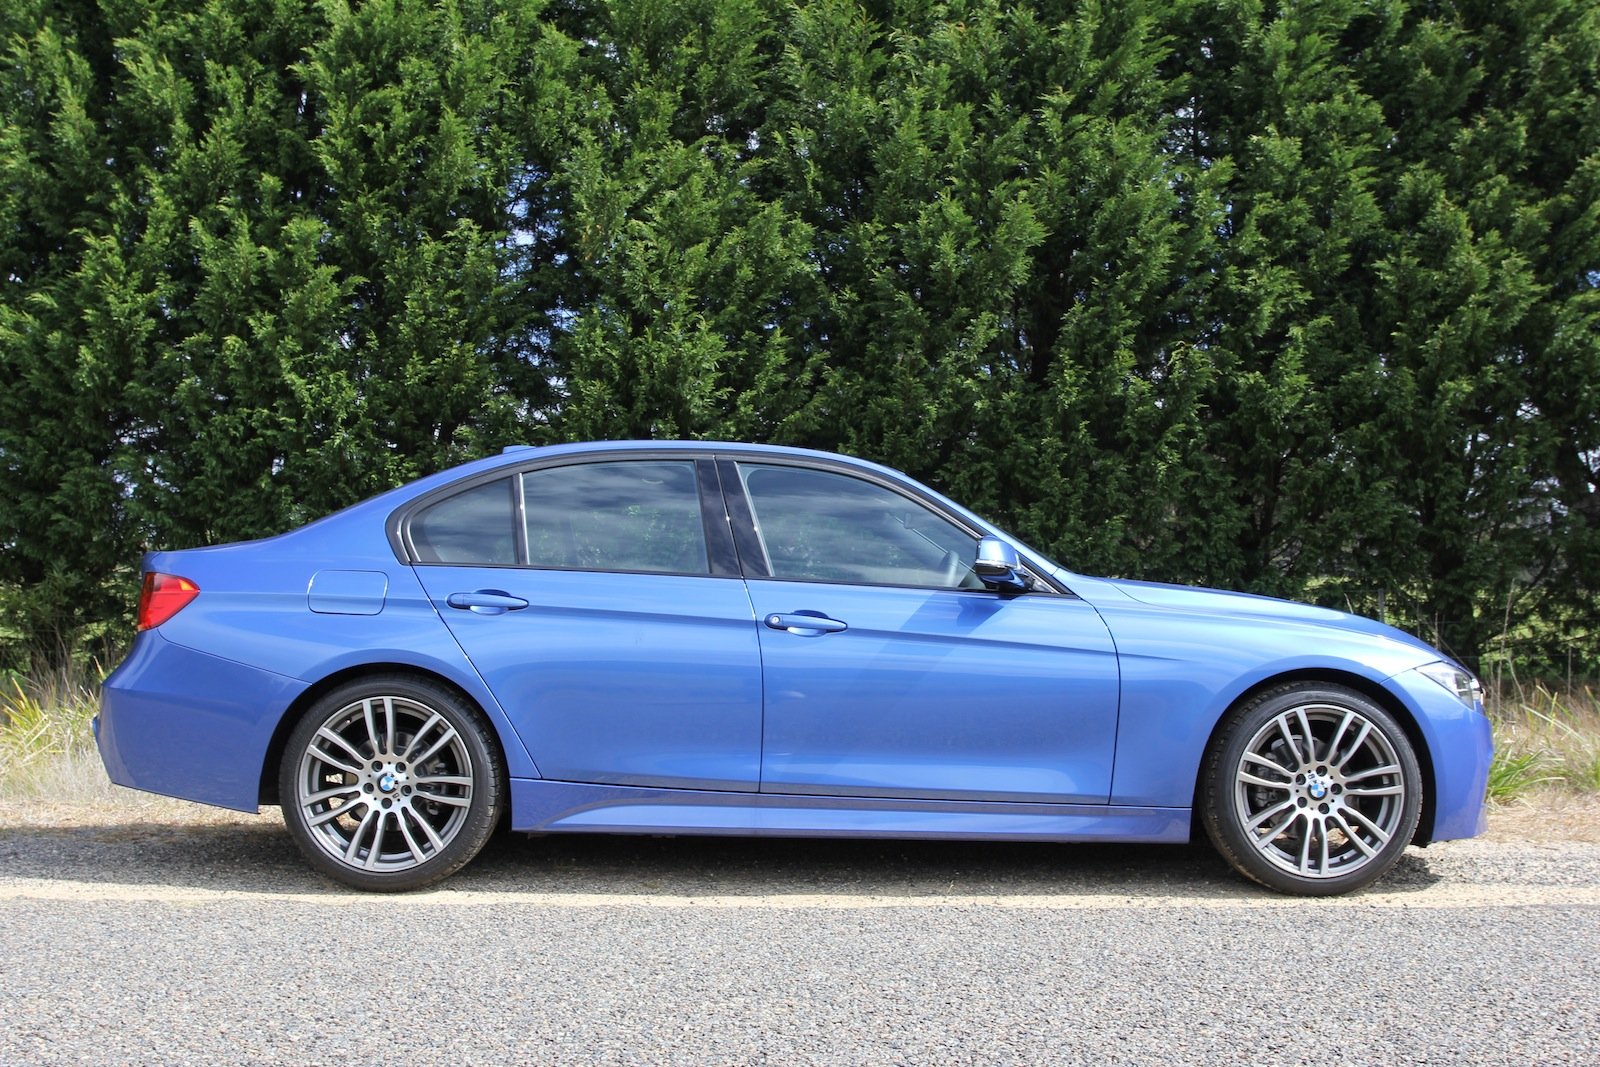 2014 bmw 3 series review